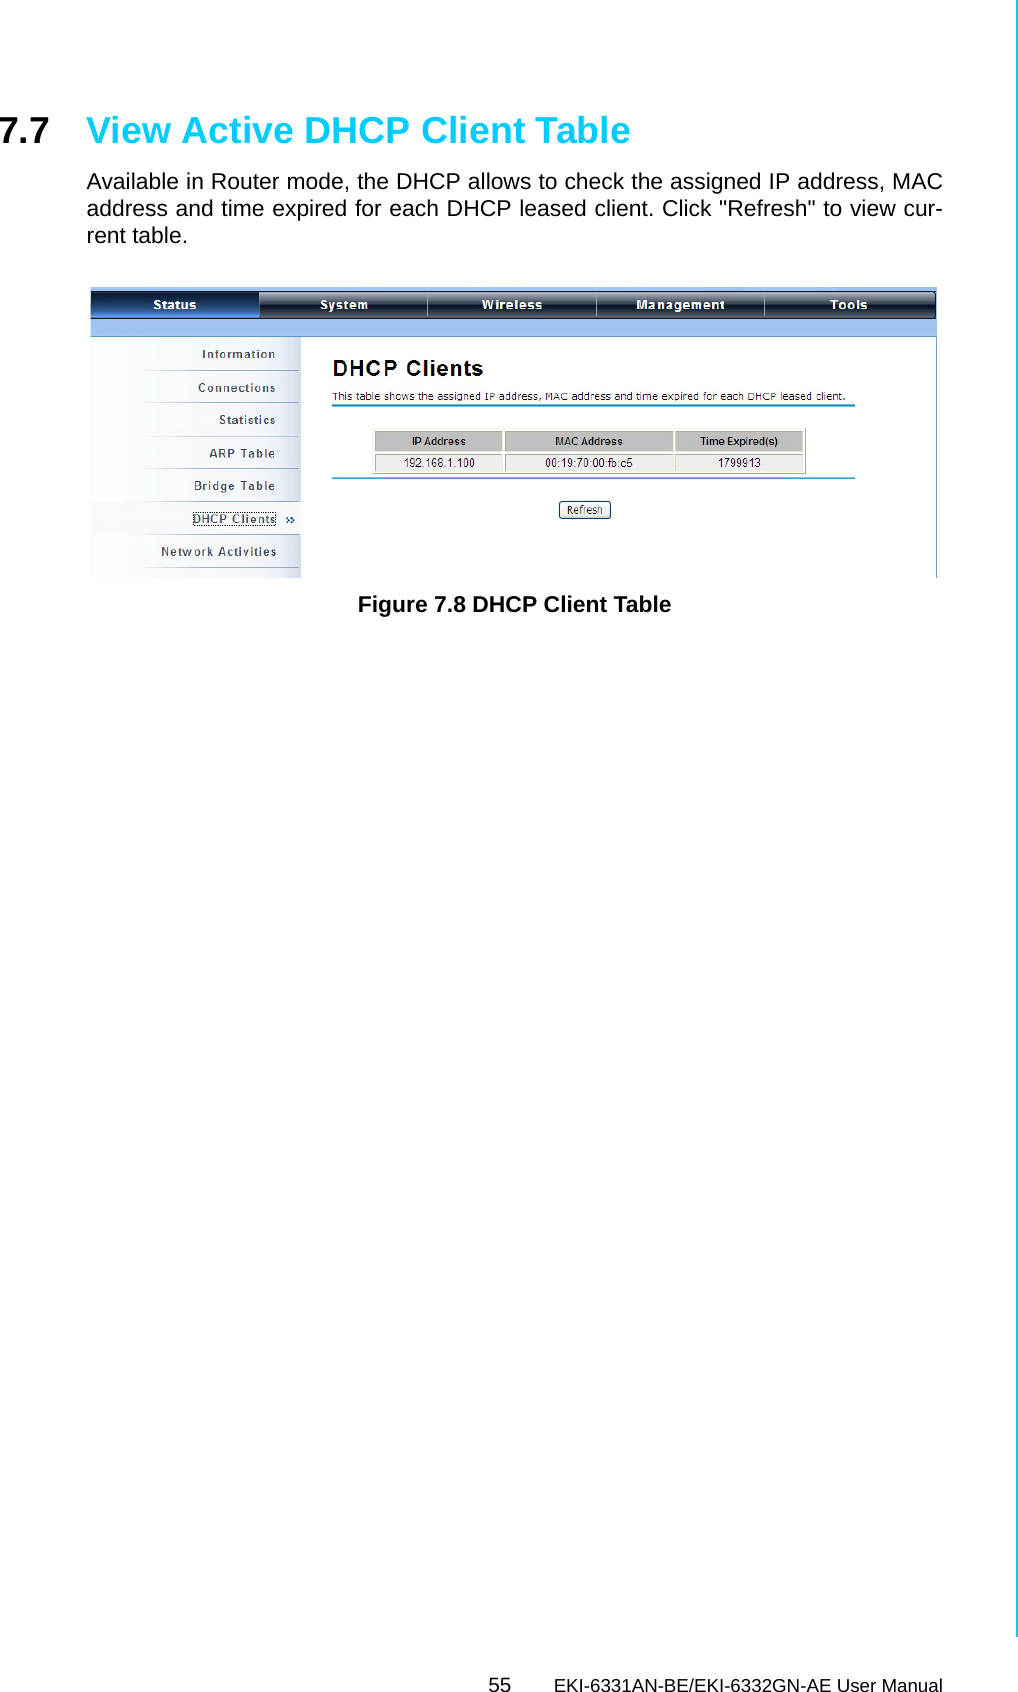 55 EKI-6331AN-BE/EKI-6332GN-AE User ManualChapter 7 Status7.7 View Active DHCP Client TableAvailable in Router mode, the DHCP allows to check the assigned IP address, MACaddress and time expired for each DHCP leased client. Click &quot;Refresh&quot; to view cur-rent table. Figure 7.8 DHCP Client Table